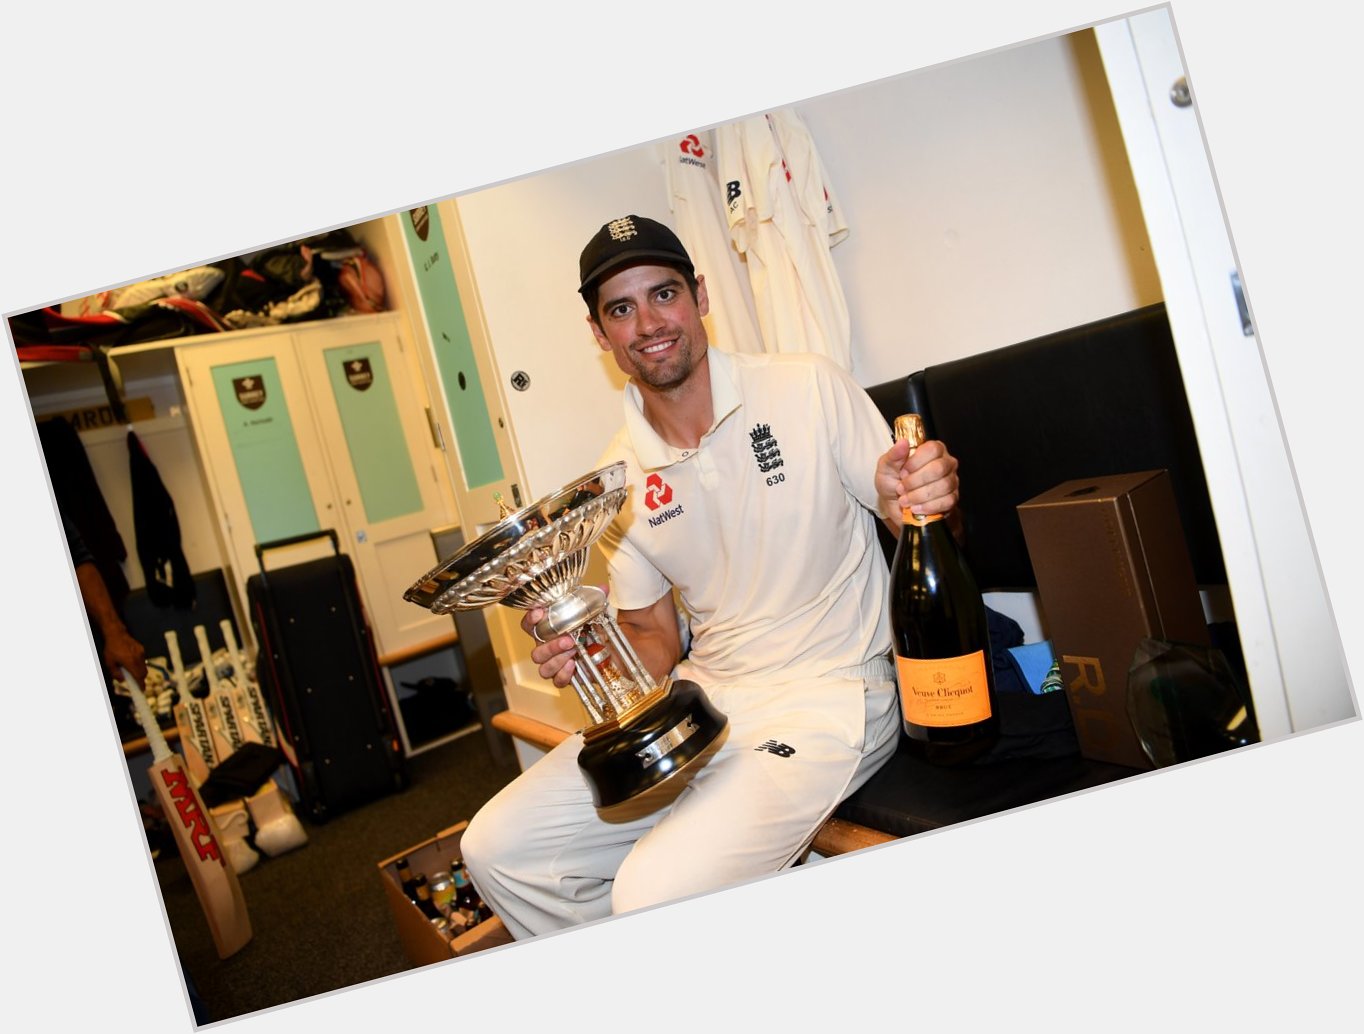  Happy 34th Birthday to and legend Alastair Cook!

What a year it has been for Chef! 